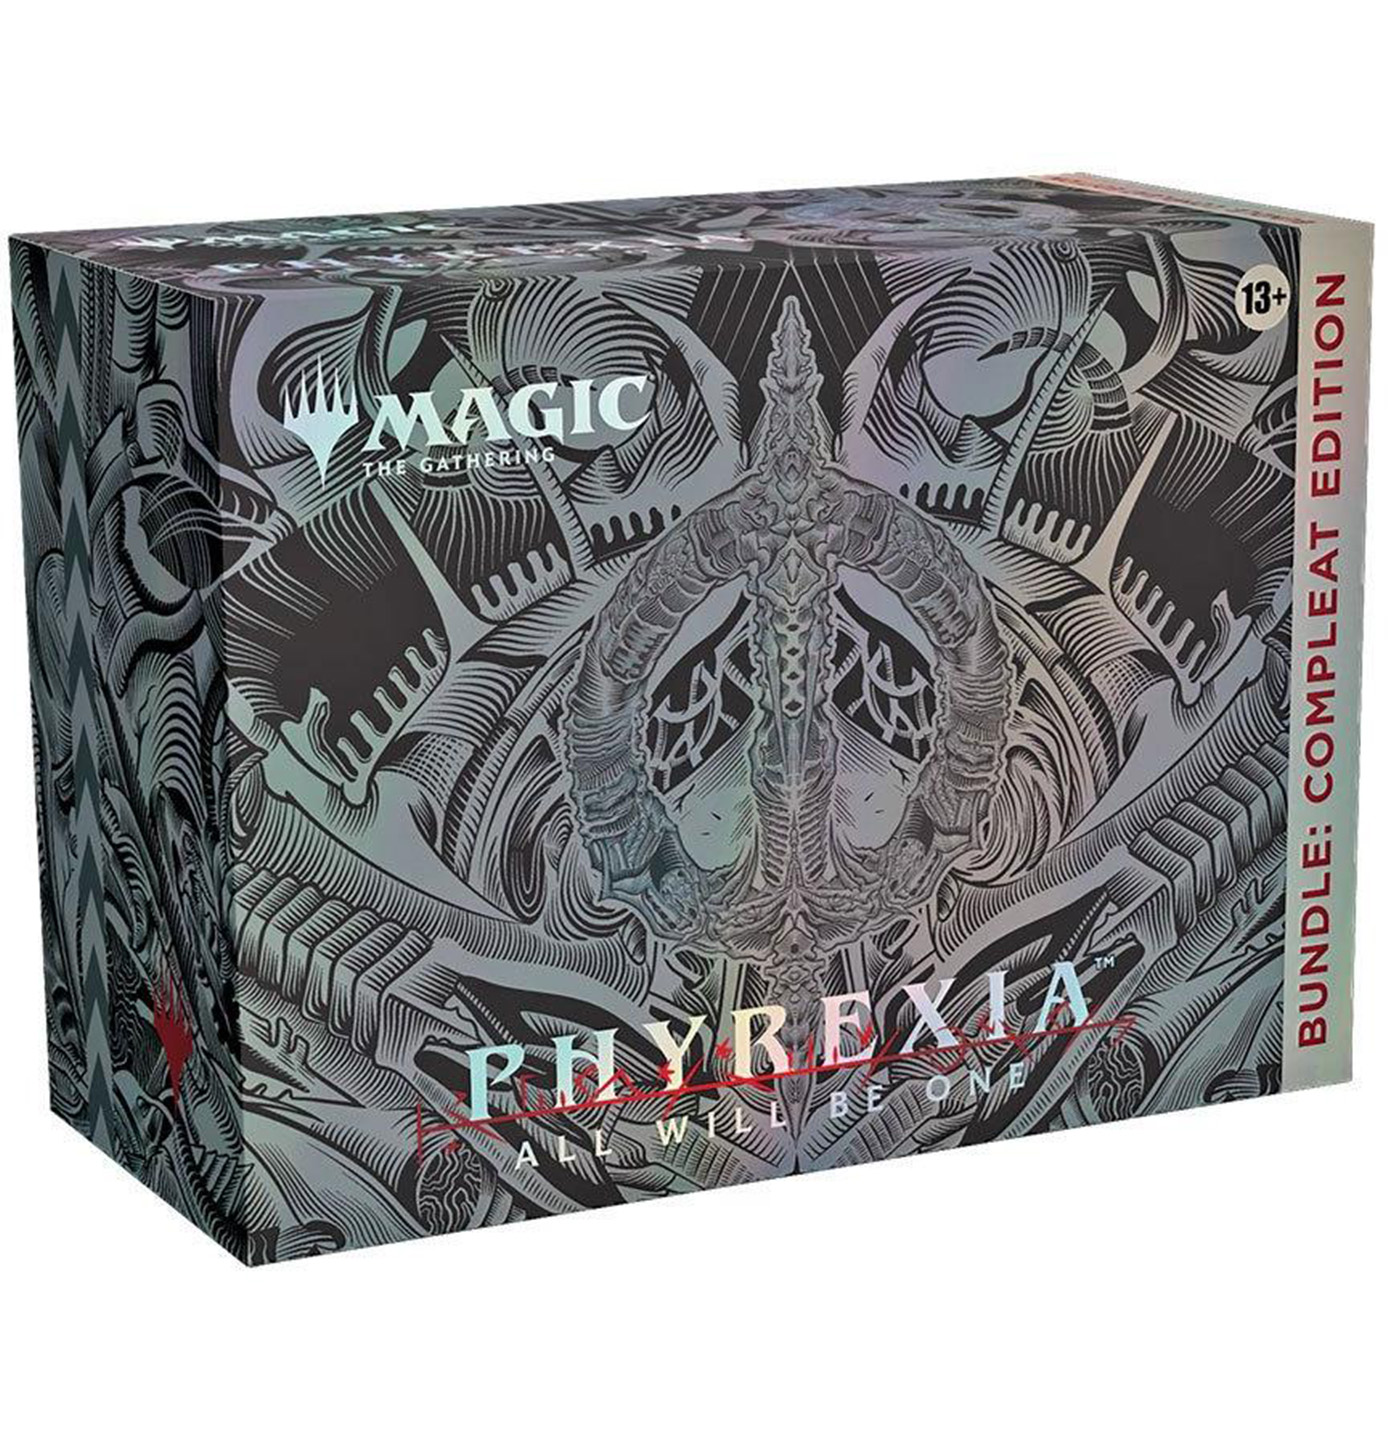 Phyrexia: All Will Be One Bundle Compleat Edition - Magic the Gathering - EN